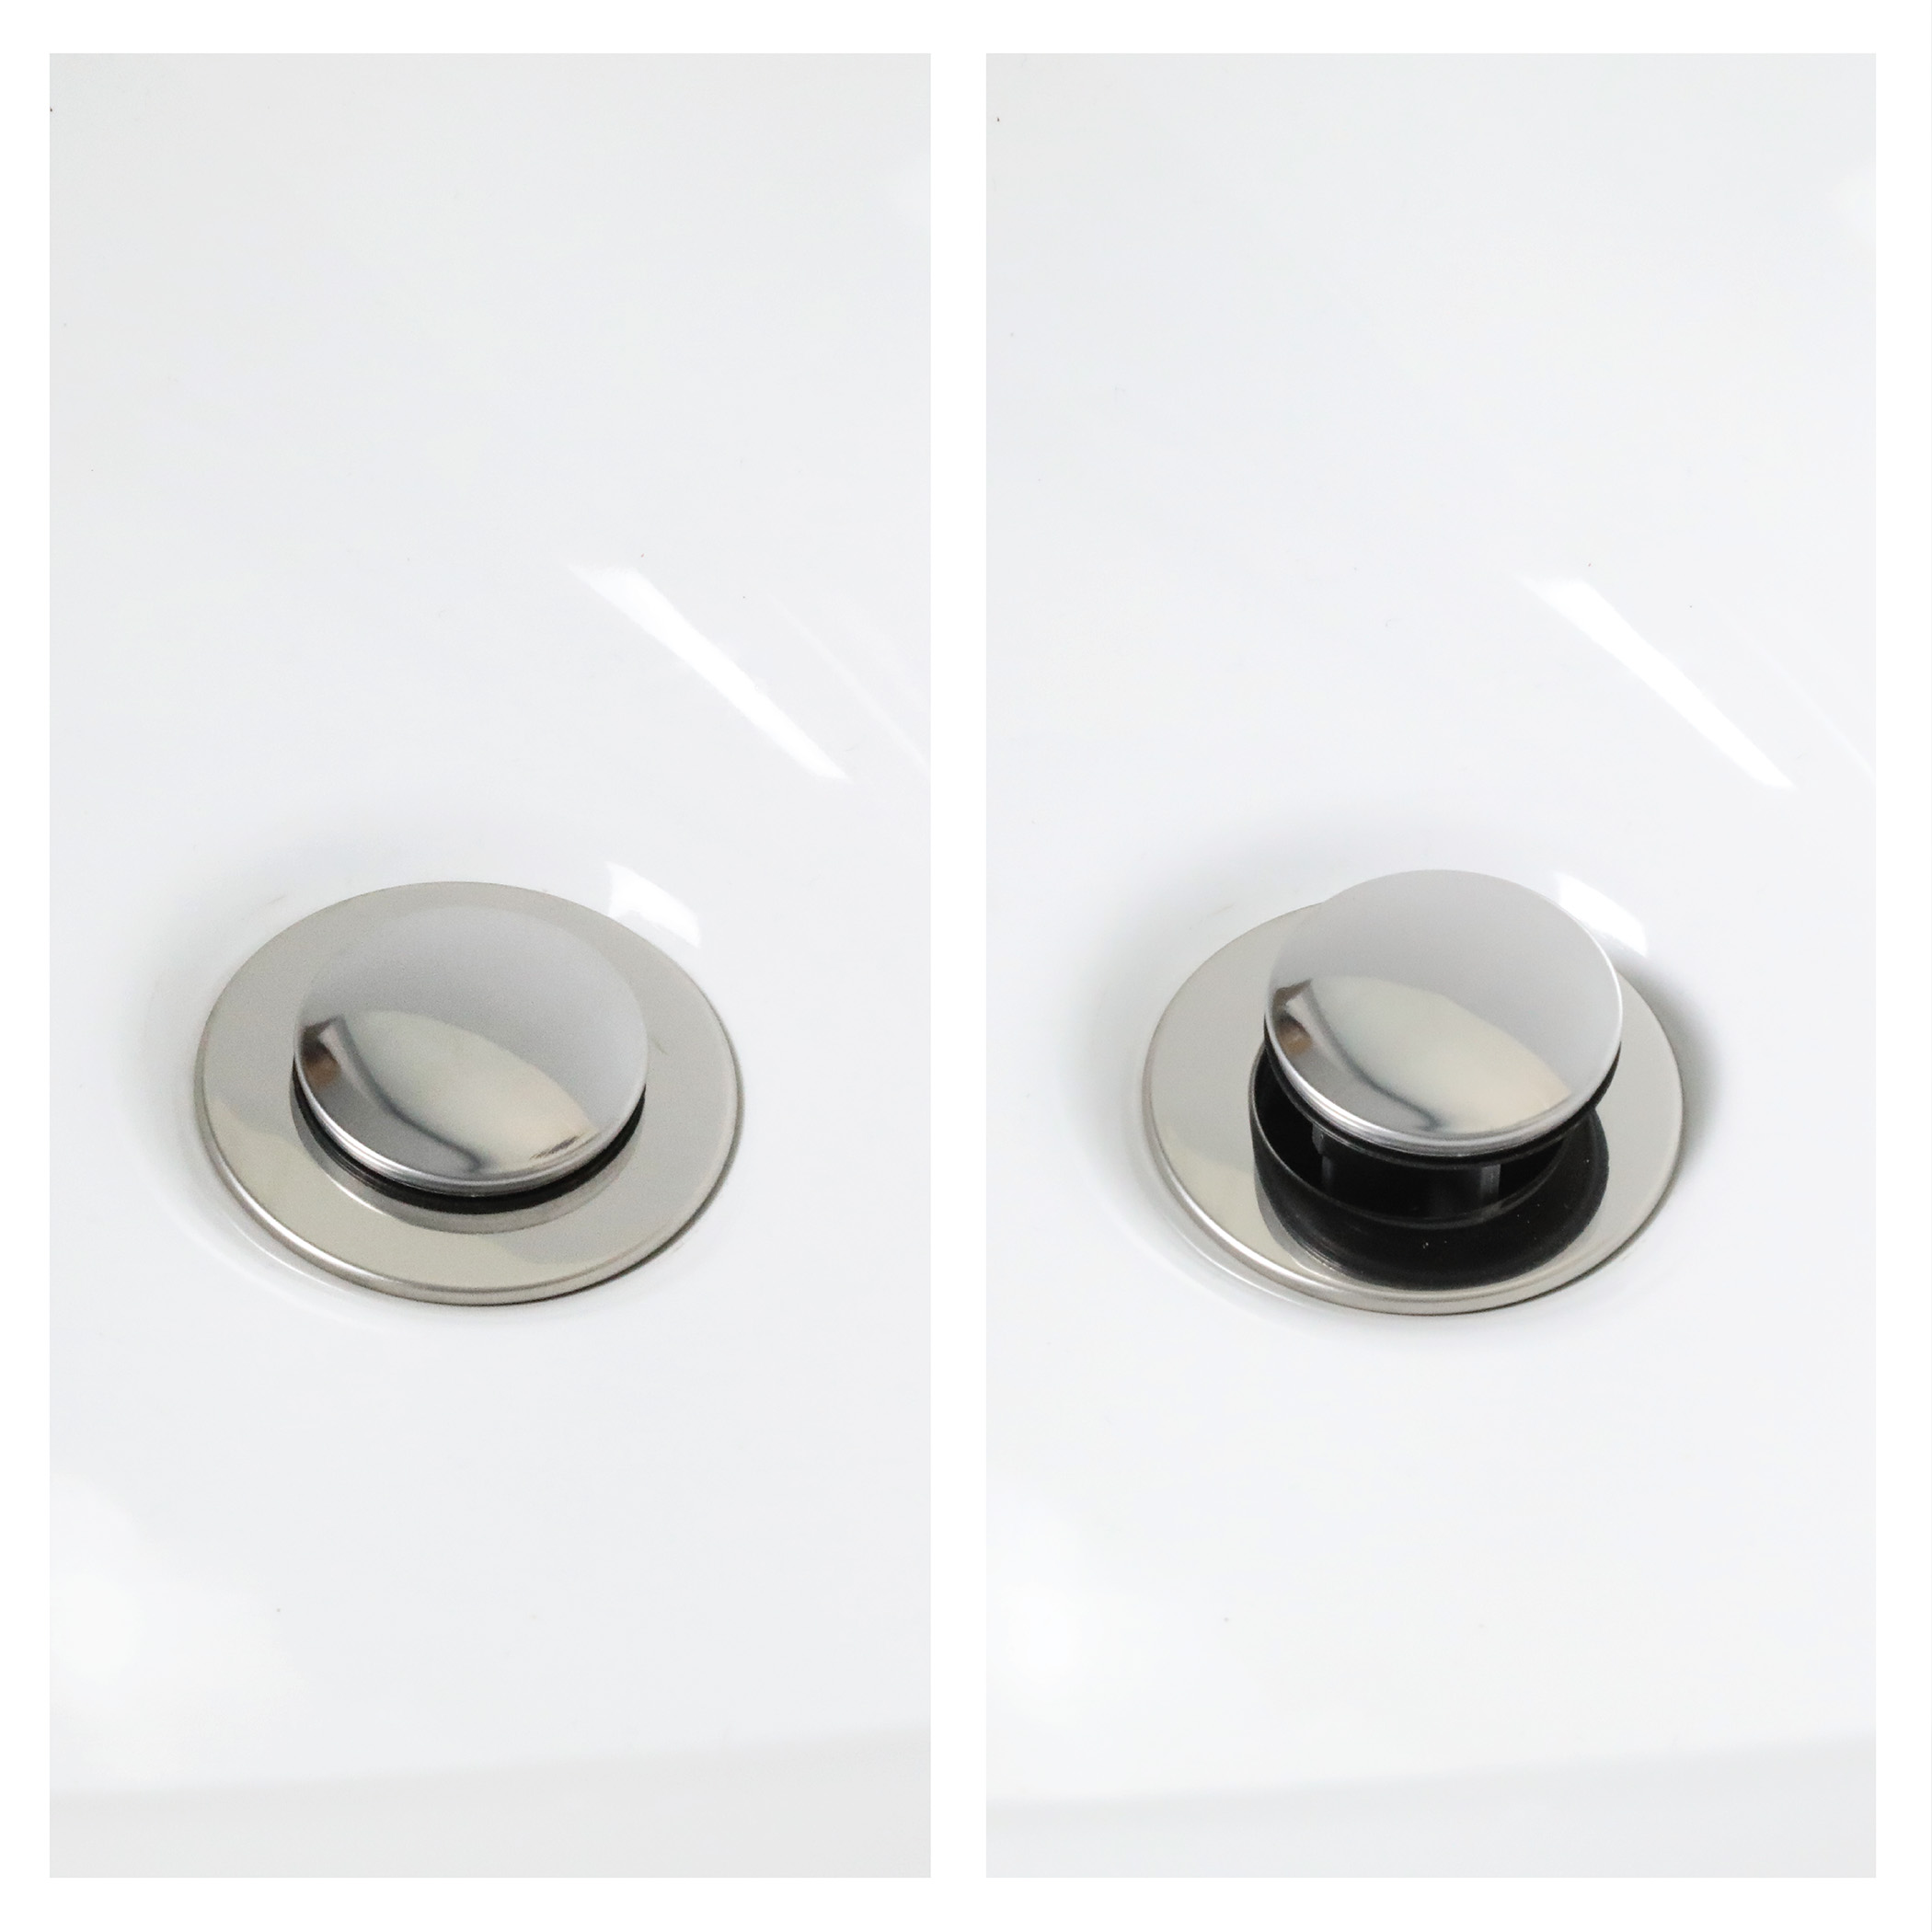 Bathroom Pop-up Stopper Replacement for Pop-up Drain Assemblies in Chrome